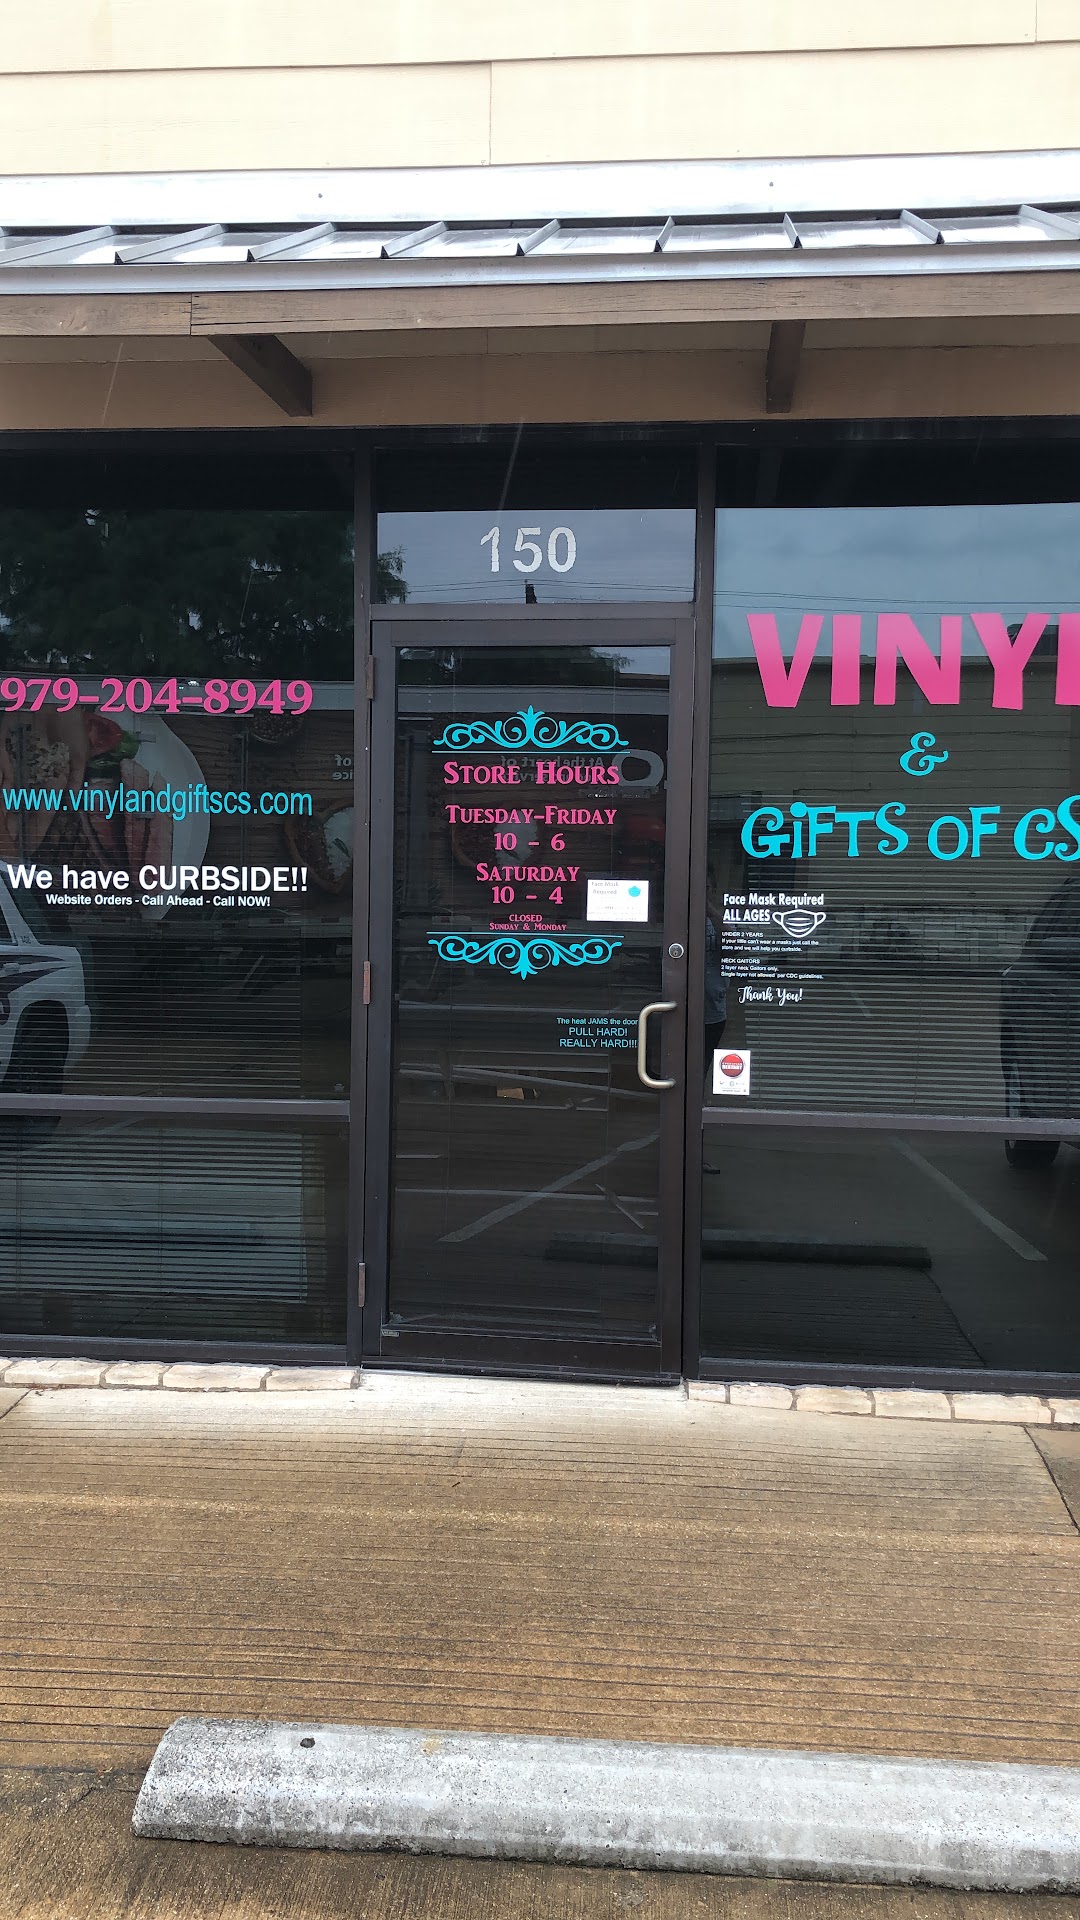 Vinyl & Gifts of College Station